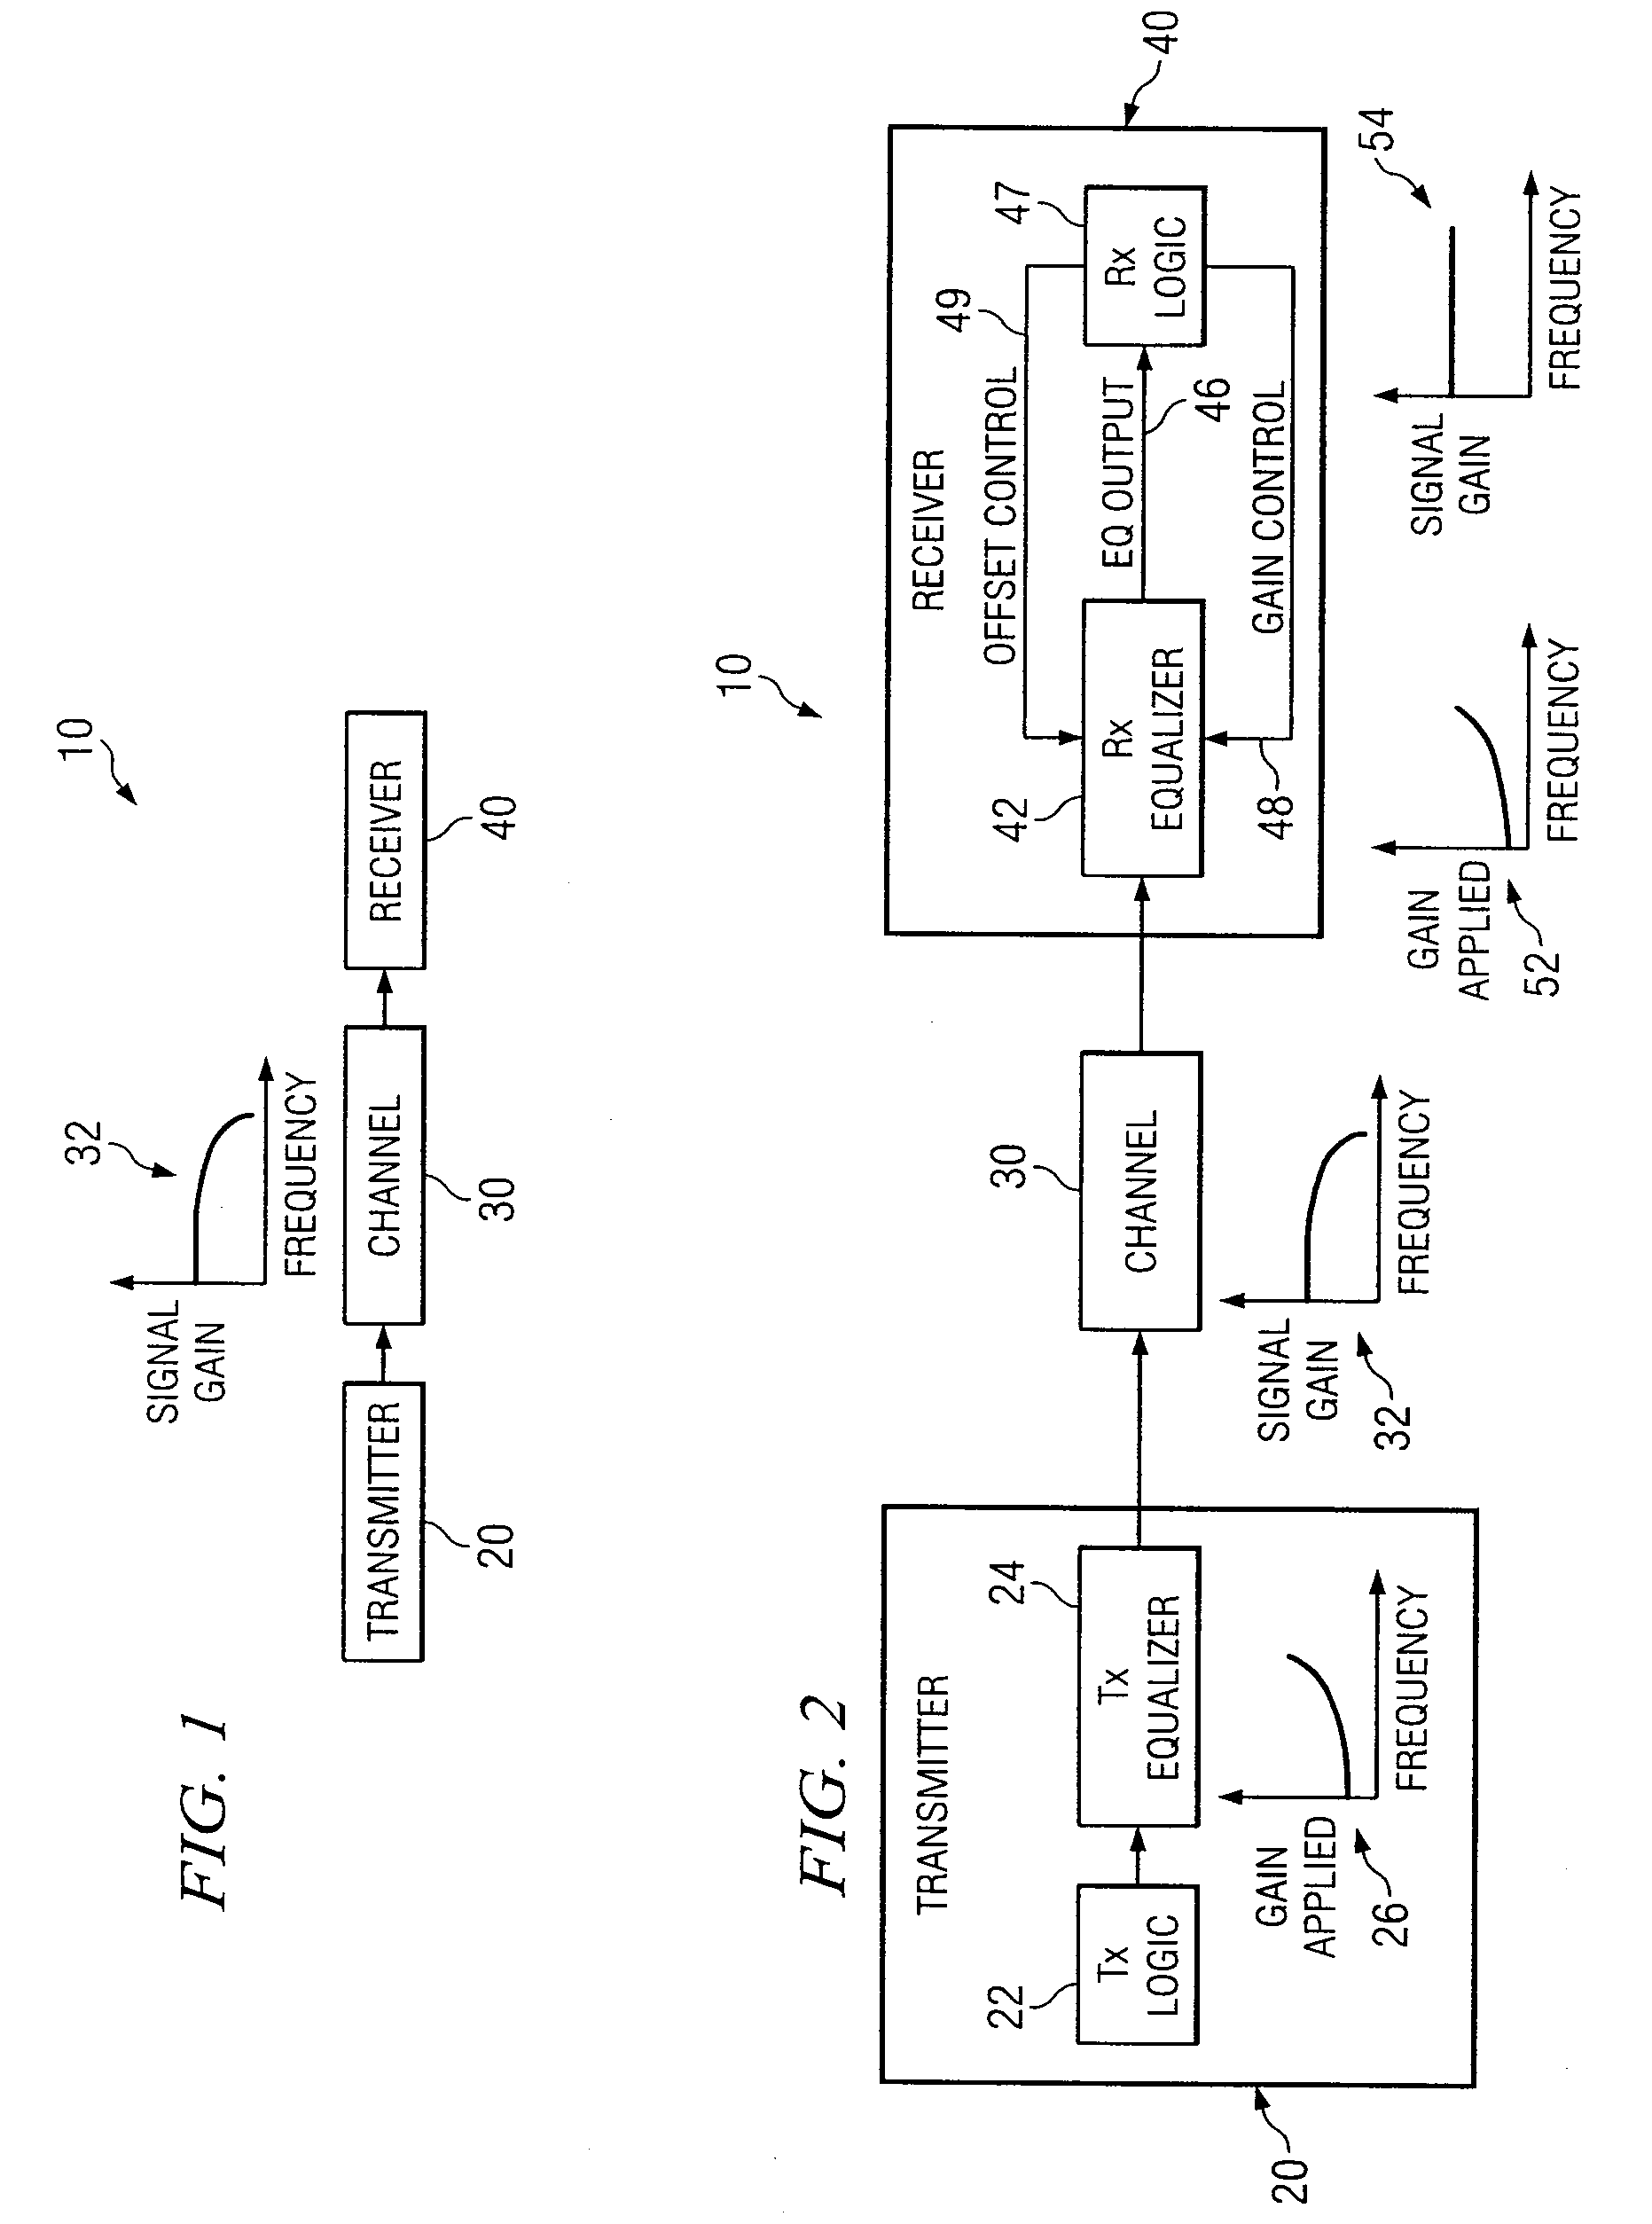 System and Method for the Non-Linear Adjustment of Compensation Applied to a Signal